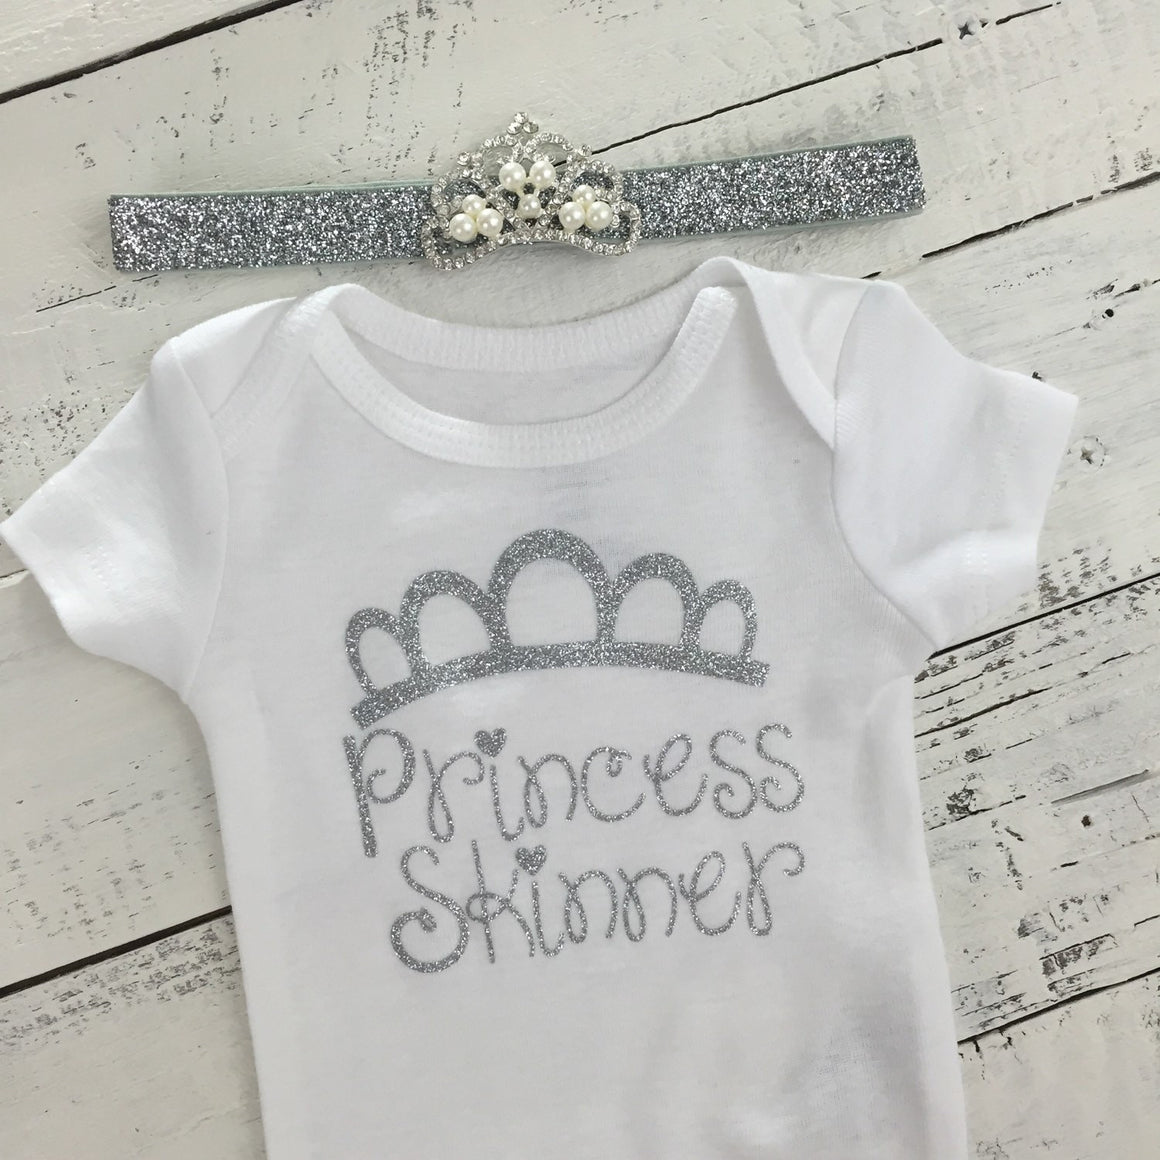 Personalized Princess Bodysuit - Silver or Gold - HoneyLoveBoutique